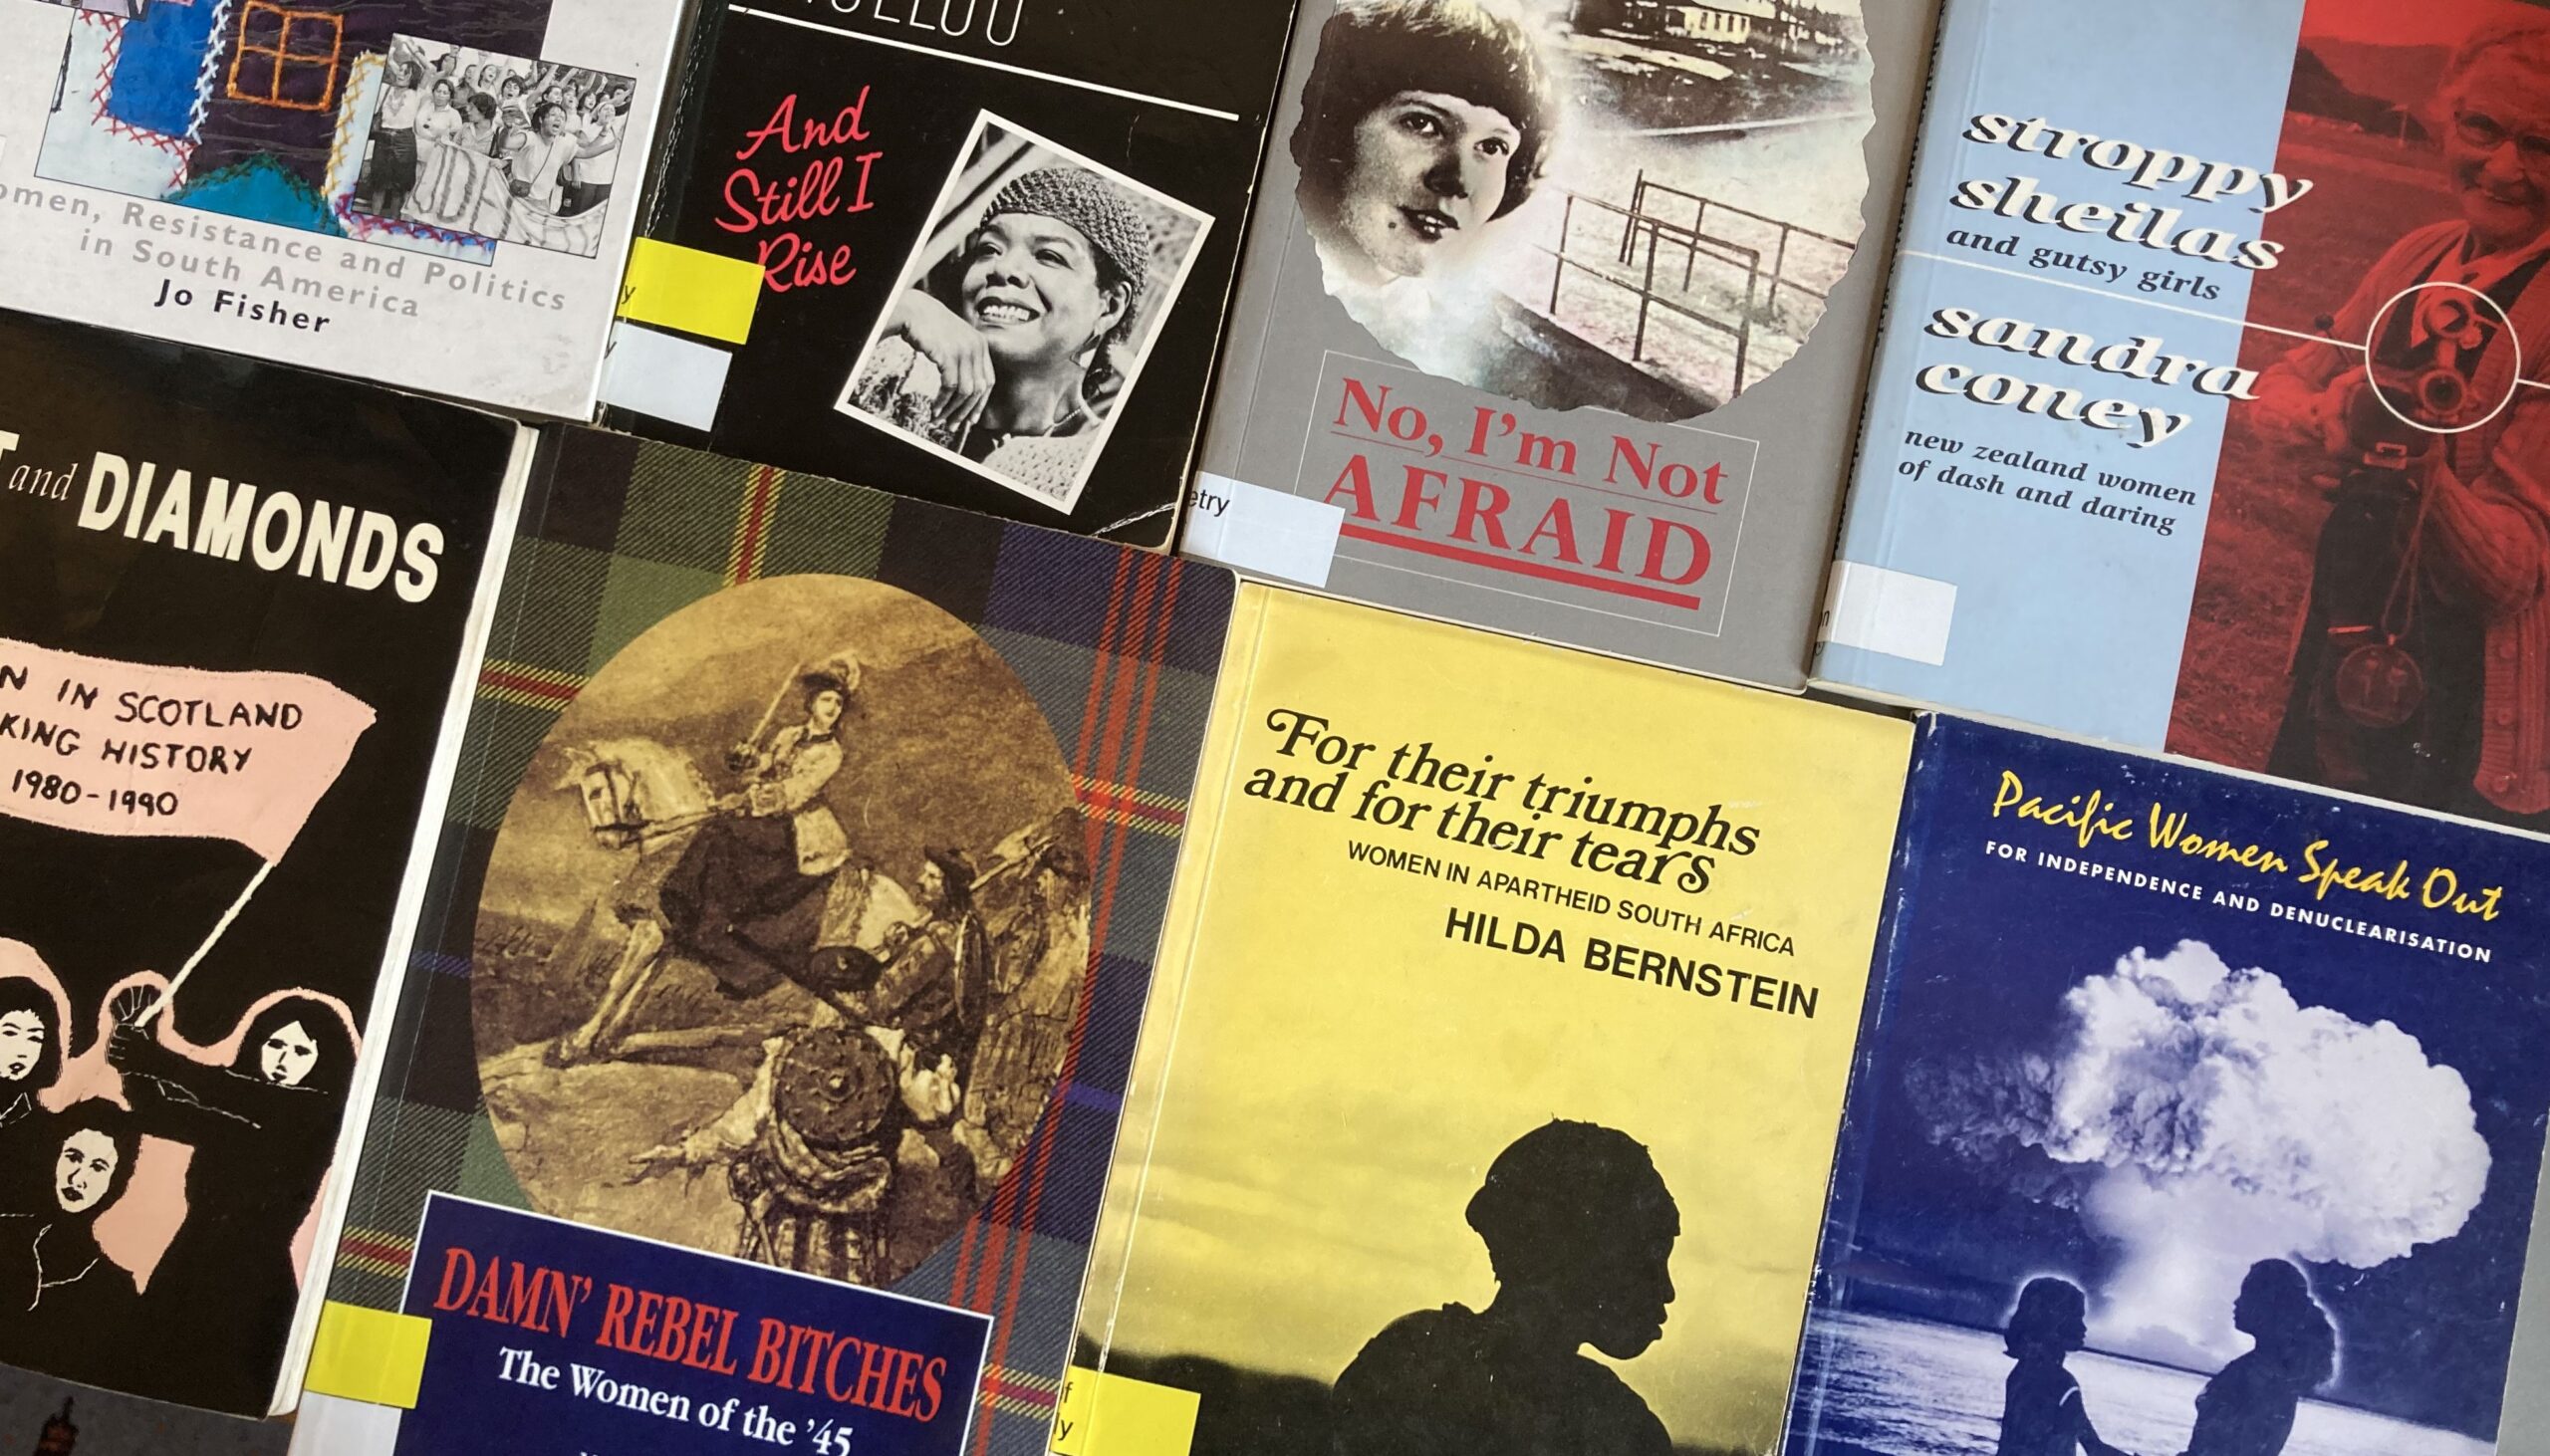 Selection of poetry and biography books about women writers, activists and campaigners.